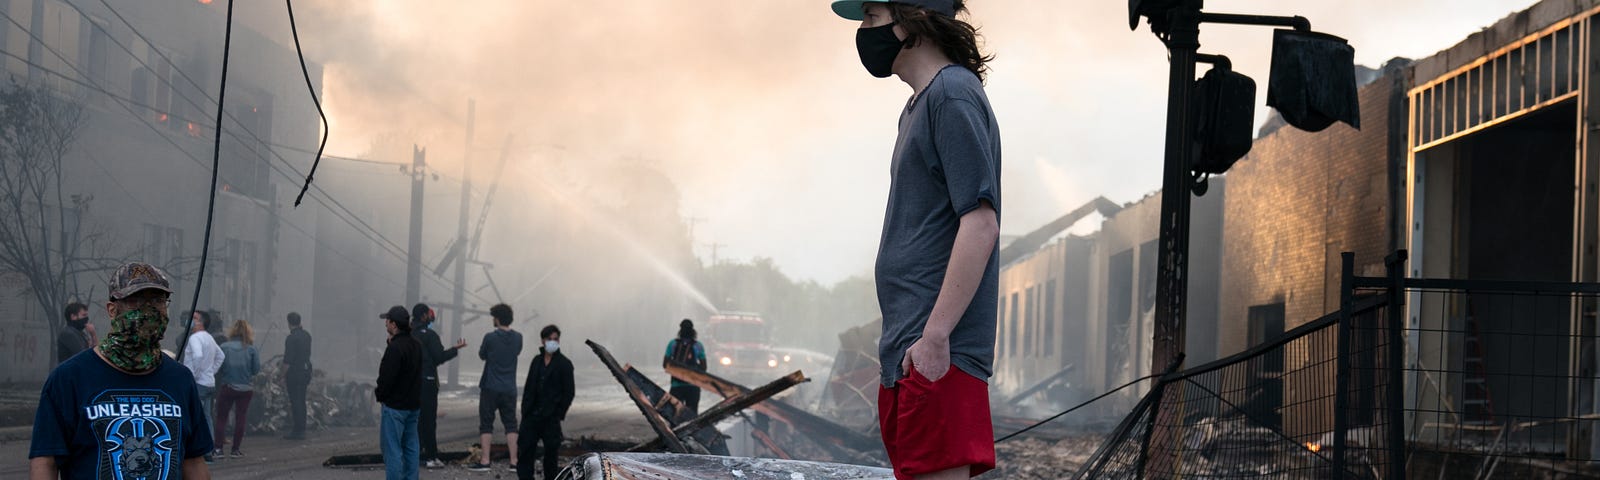 A man stands on a burned out car on Thursday morning as fires burn behind him in the Lake St area of Minneapolis, Minnesota